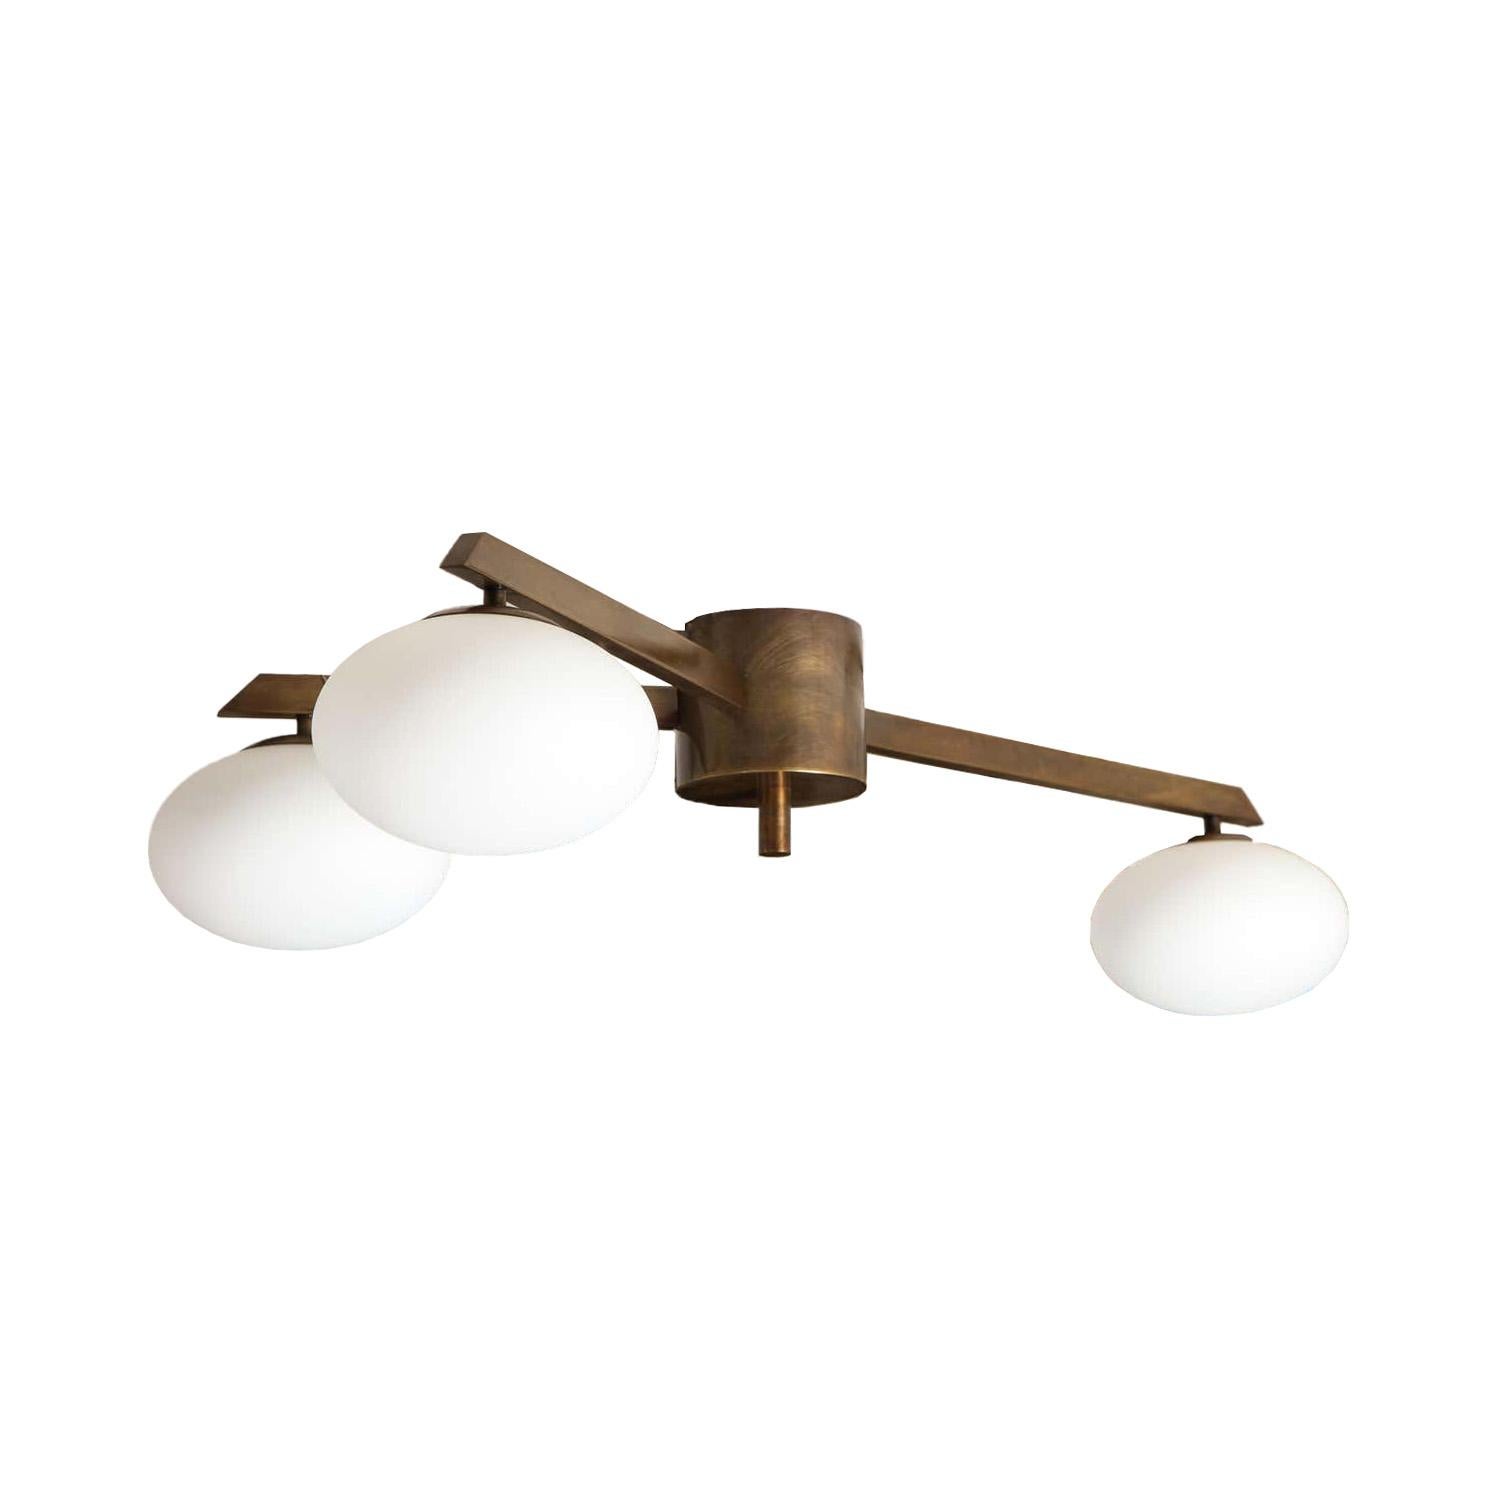 Murano opaline glass 3 globe flush mount light fixture with brass body. In the style of Angelo Lelli. By Venfield, Italy. 

Custom design, dimensions and finishes are available. Please inquire with Venfield for pricing and lead times.